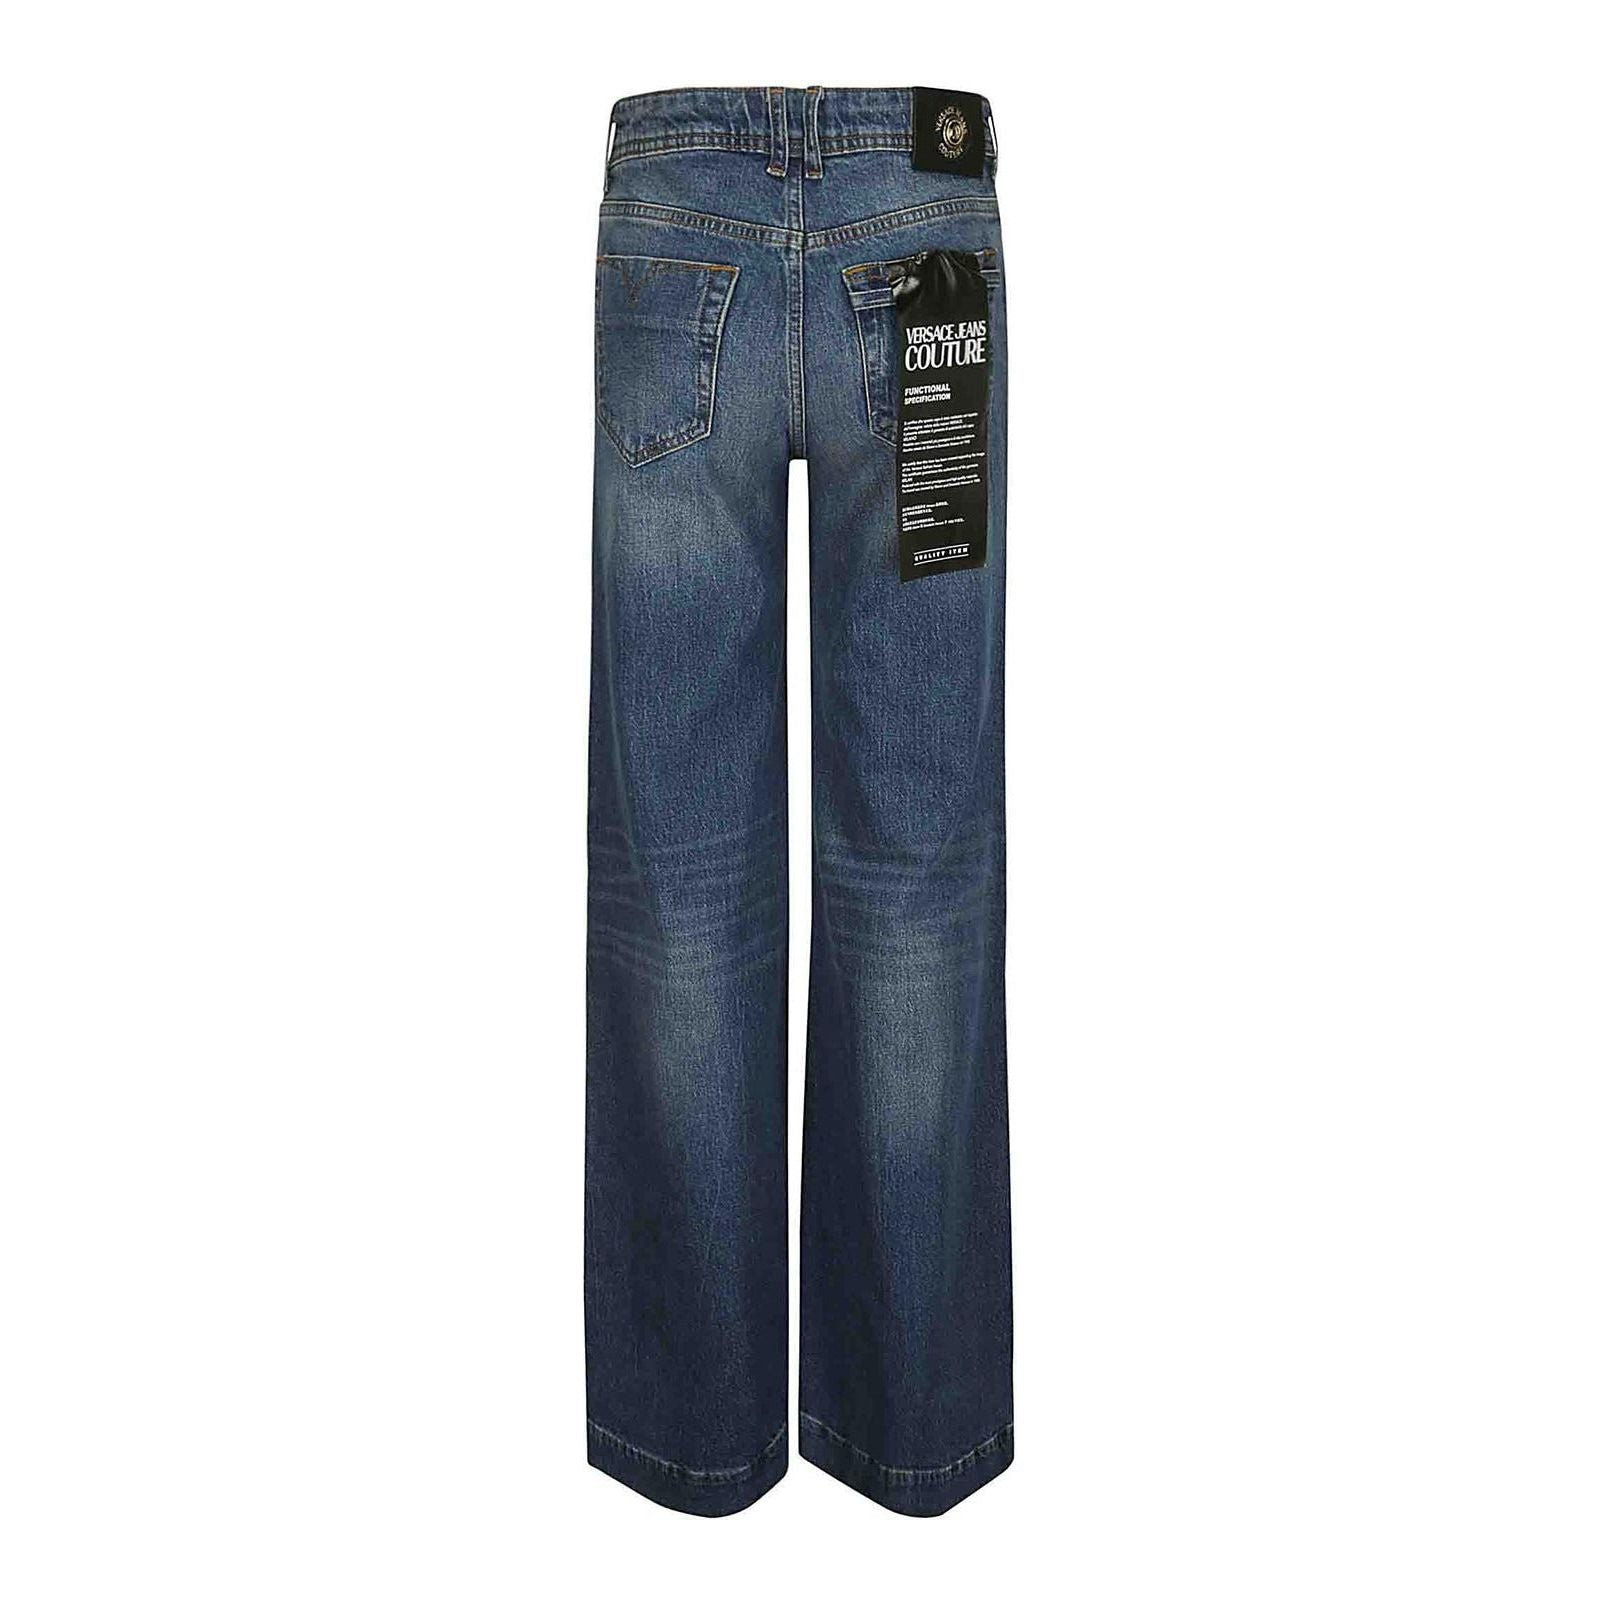 VERSACE JEANS COUTURE JEANS - Yooto